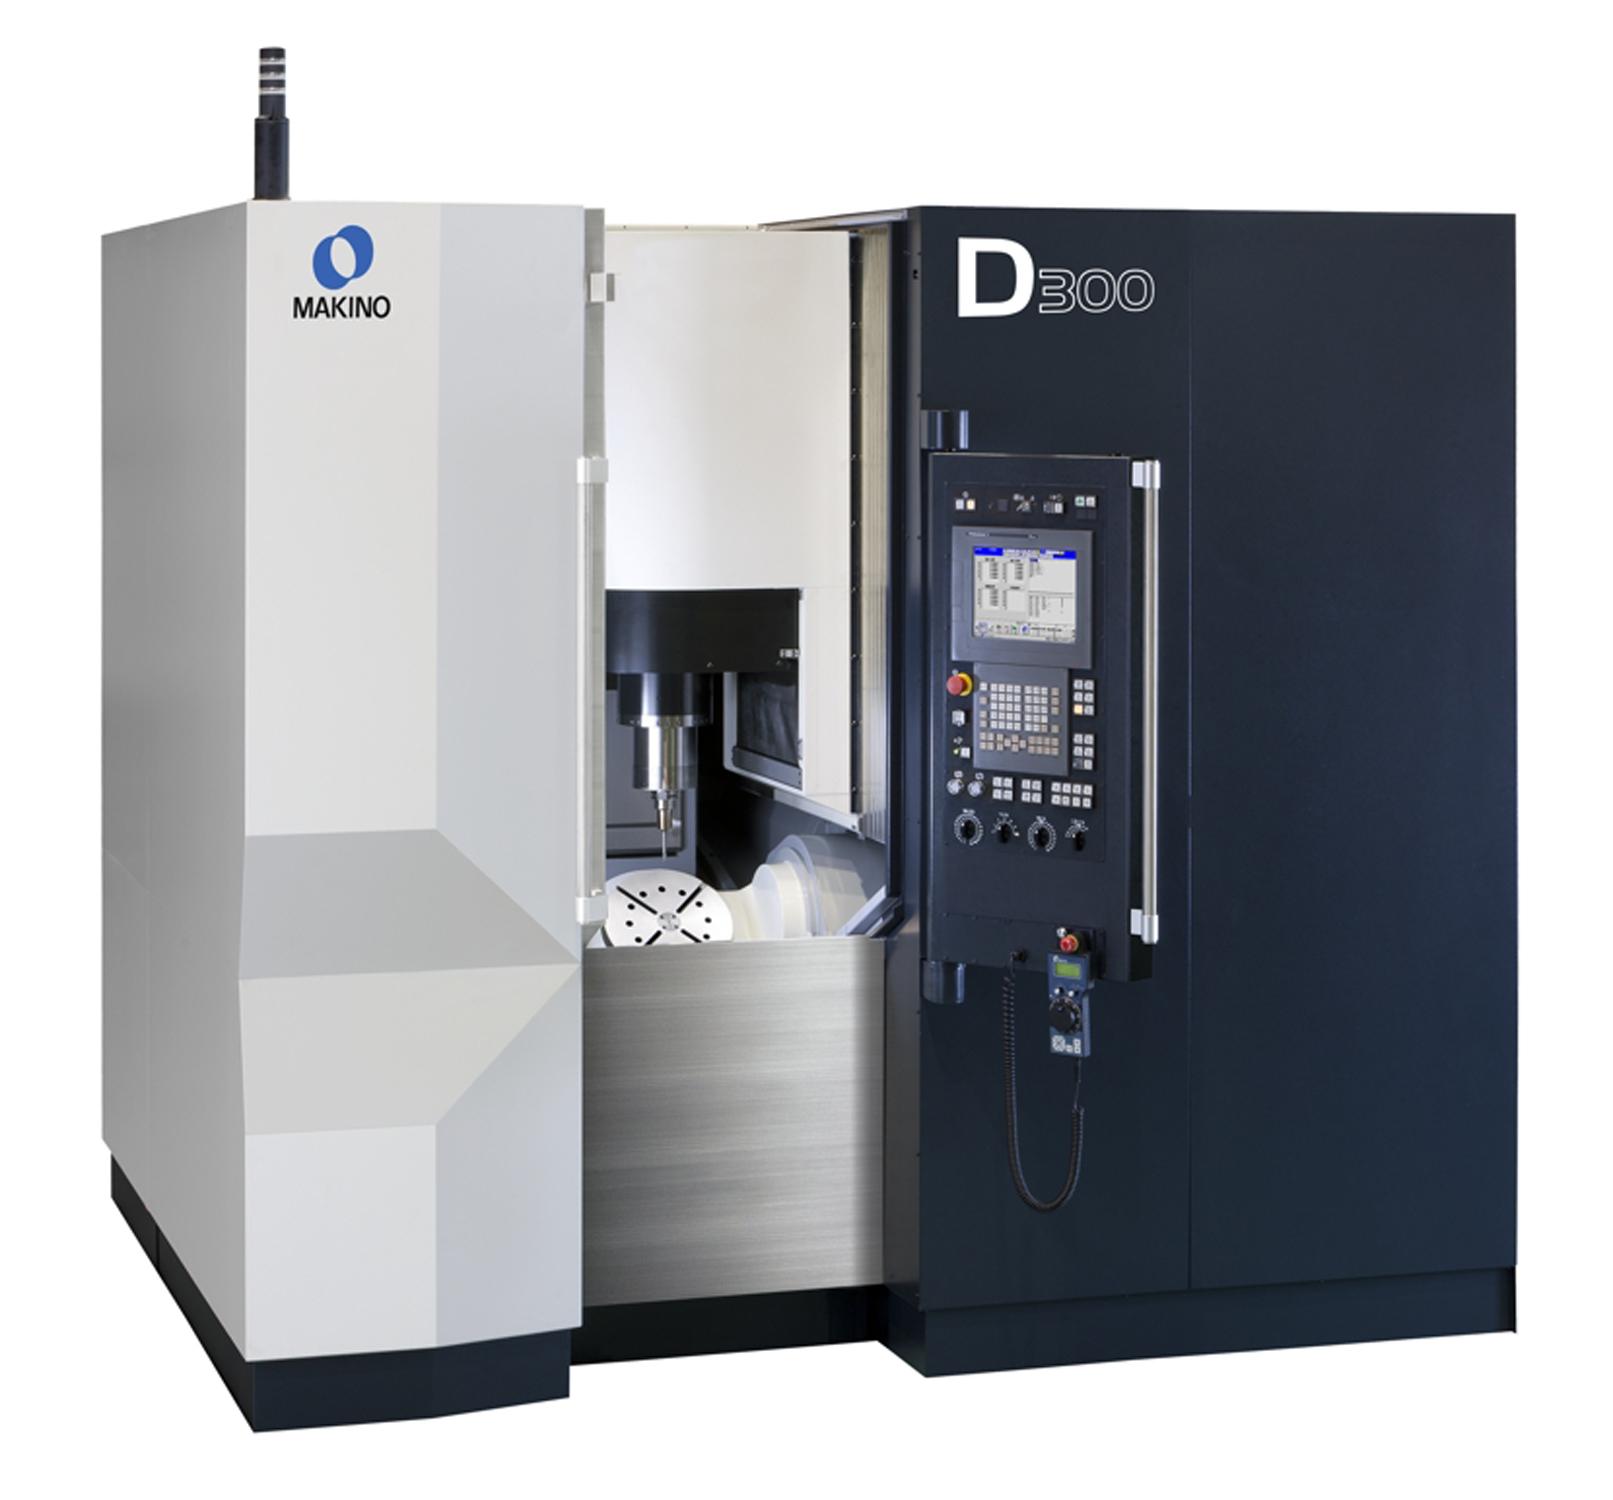 Makino 5 Axis Vertical Machining Center Provides Speed And Flexibility For Aerospace Machining